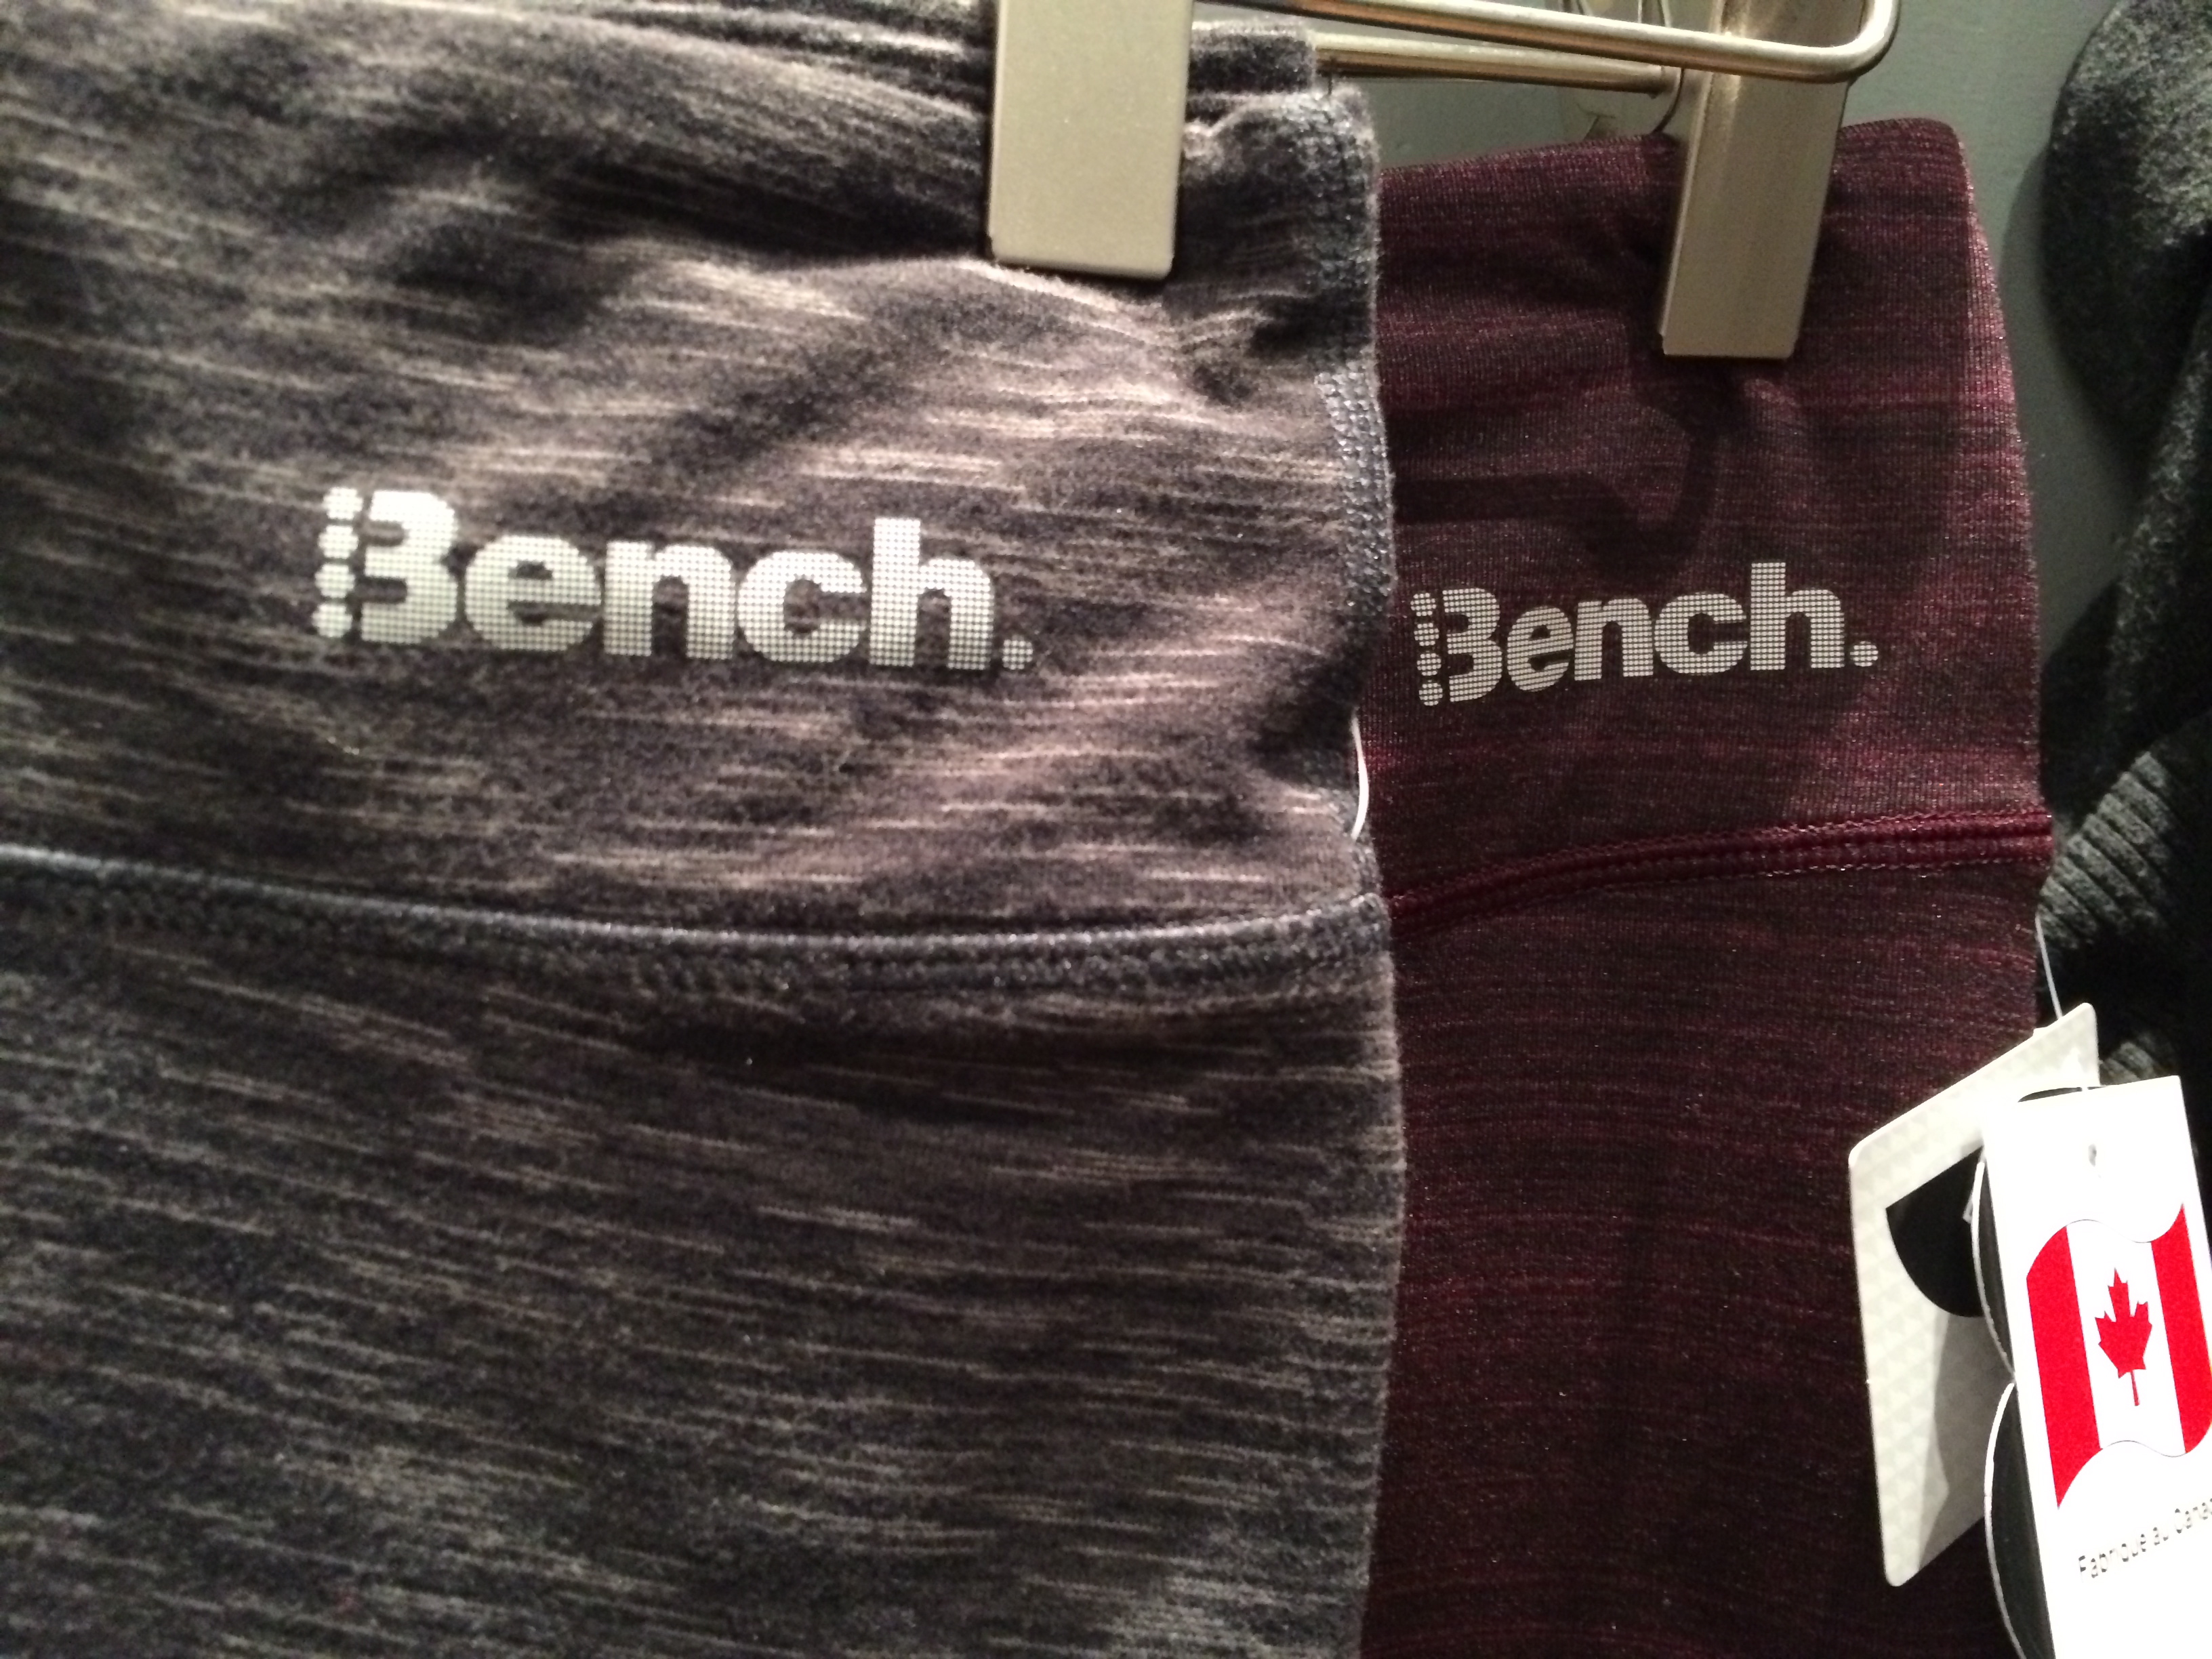 Bench. Canada Rolls Out Activewear Collection - Fitness Test Drive